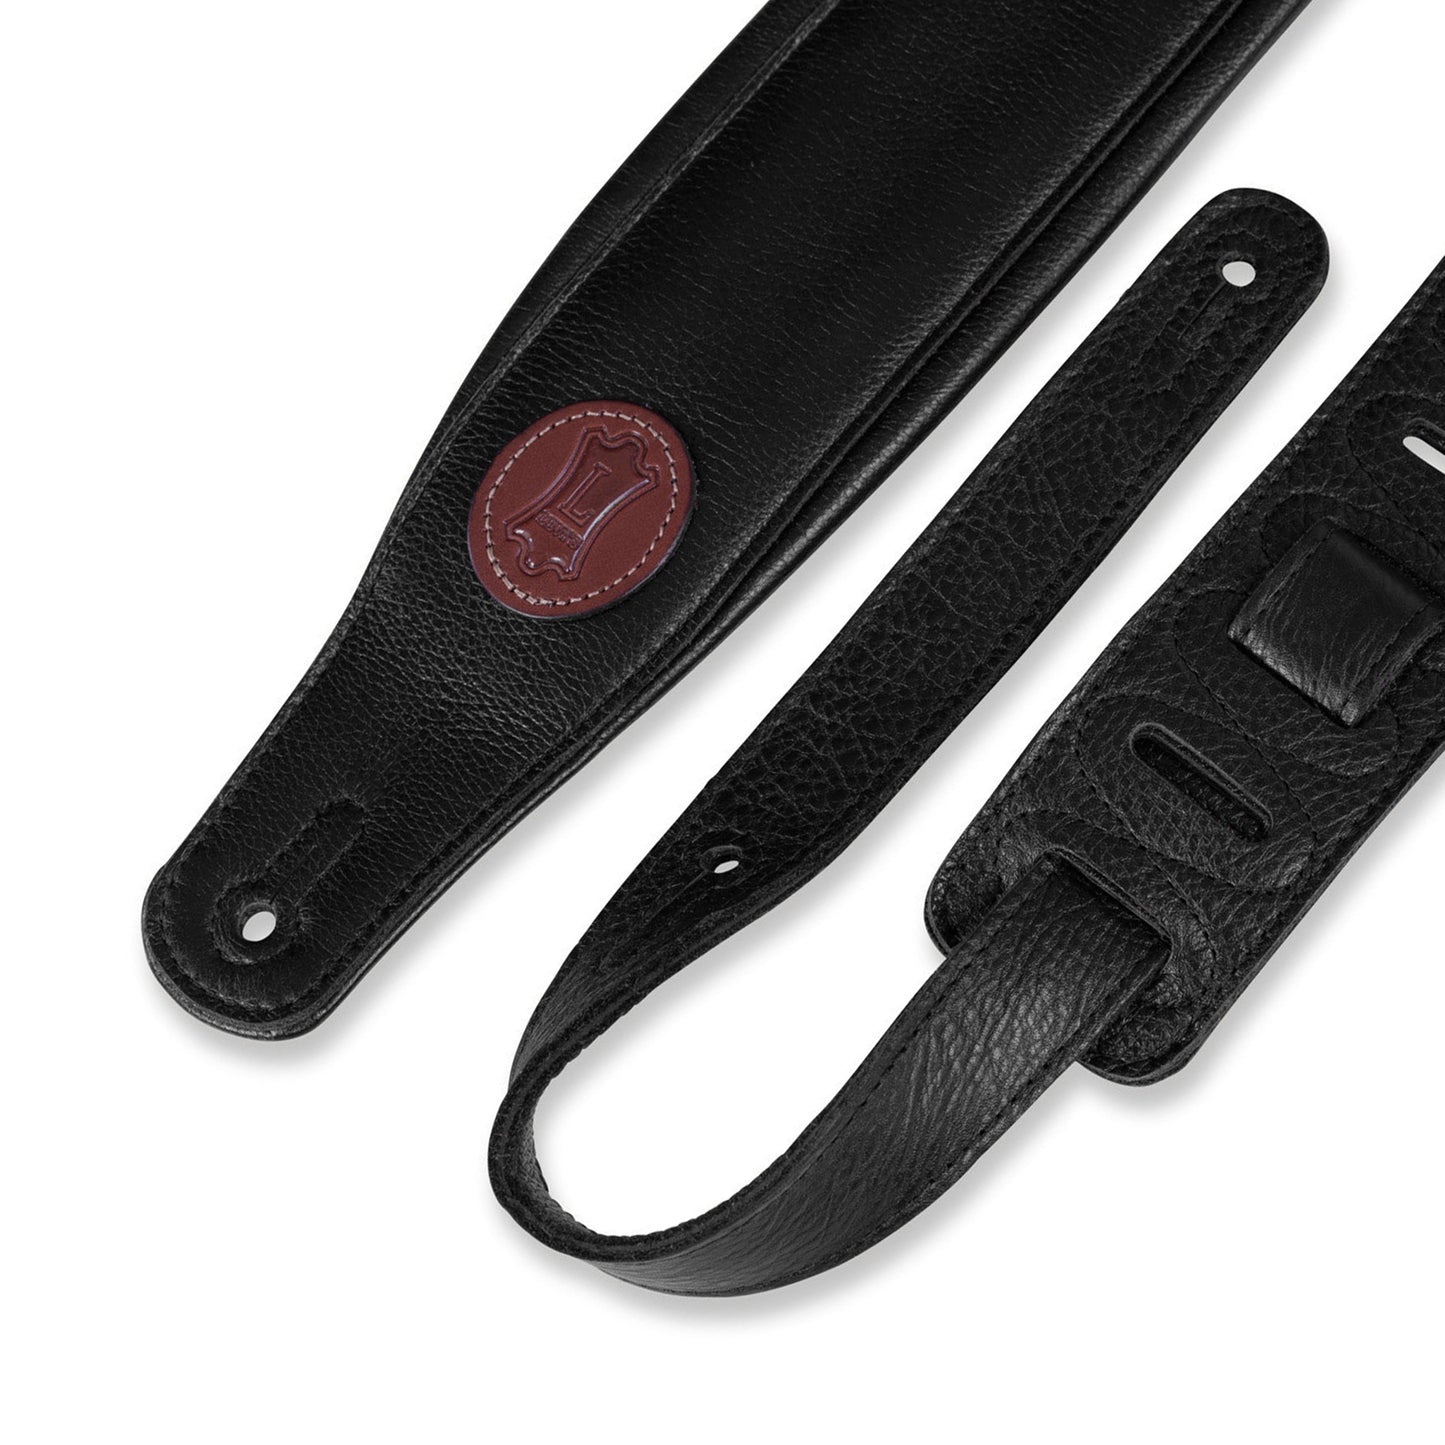 Levy's Signature 3" Padded Garment Leather Guitar & Bass Strap